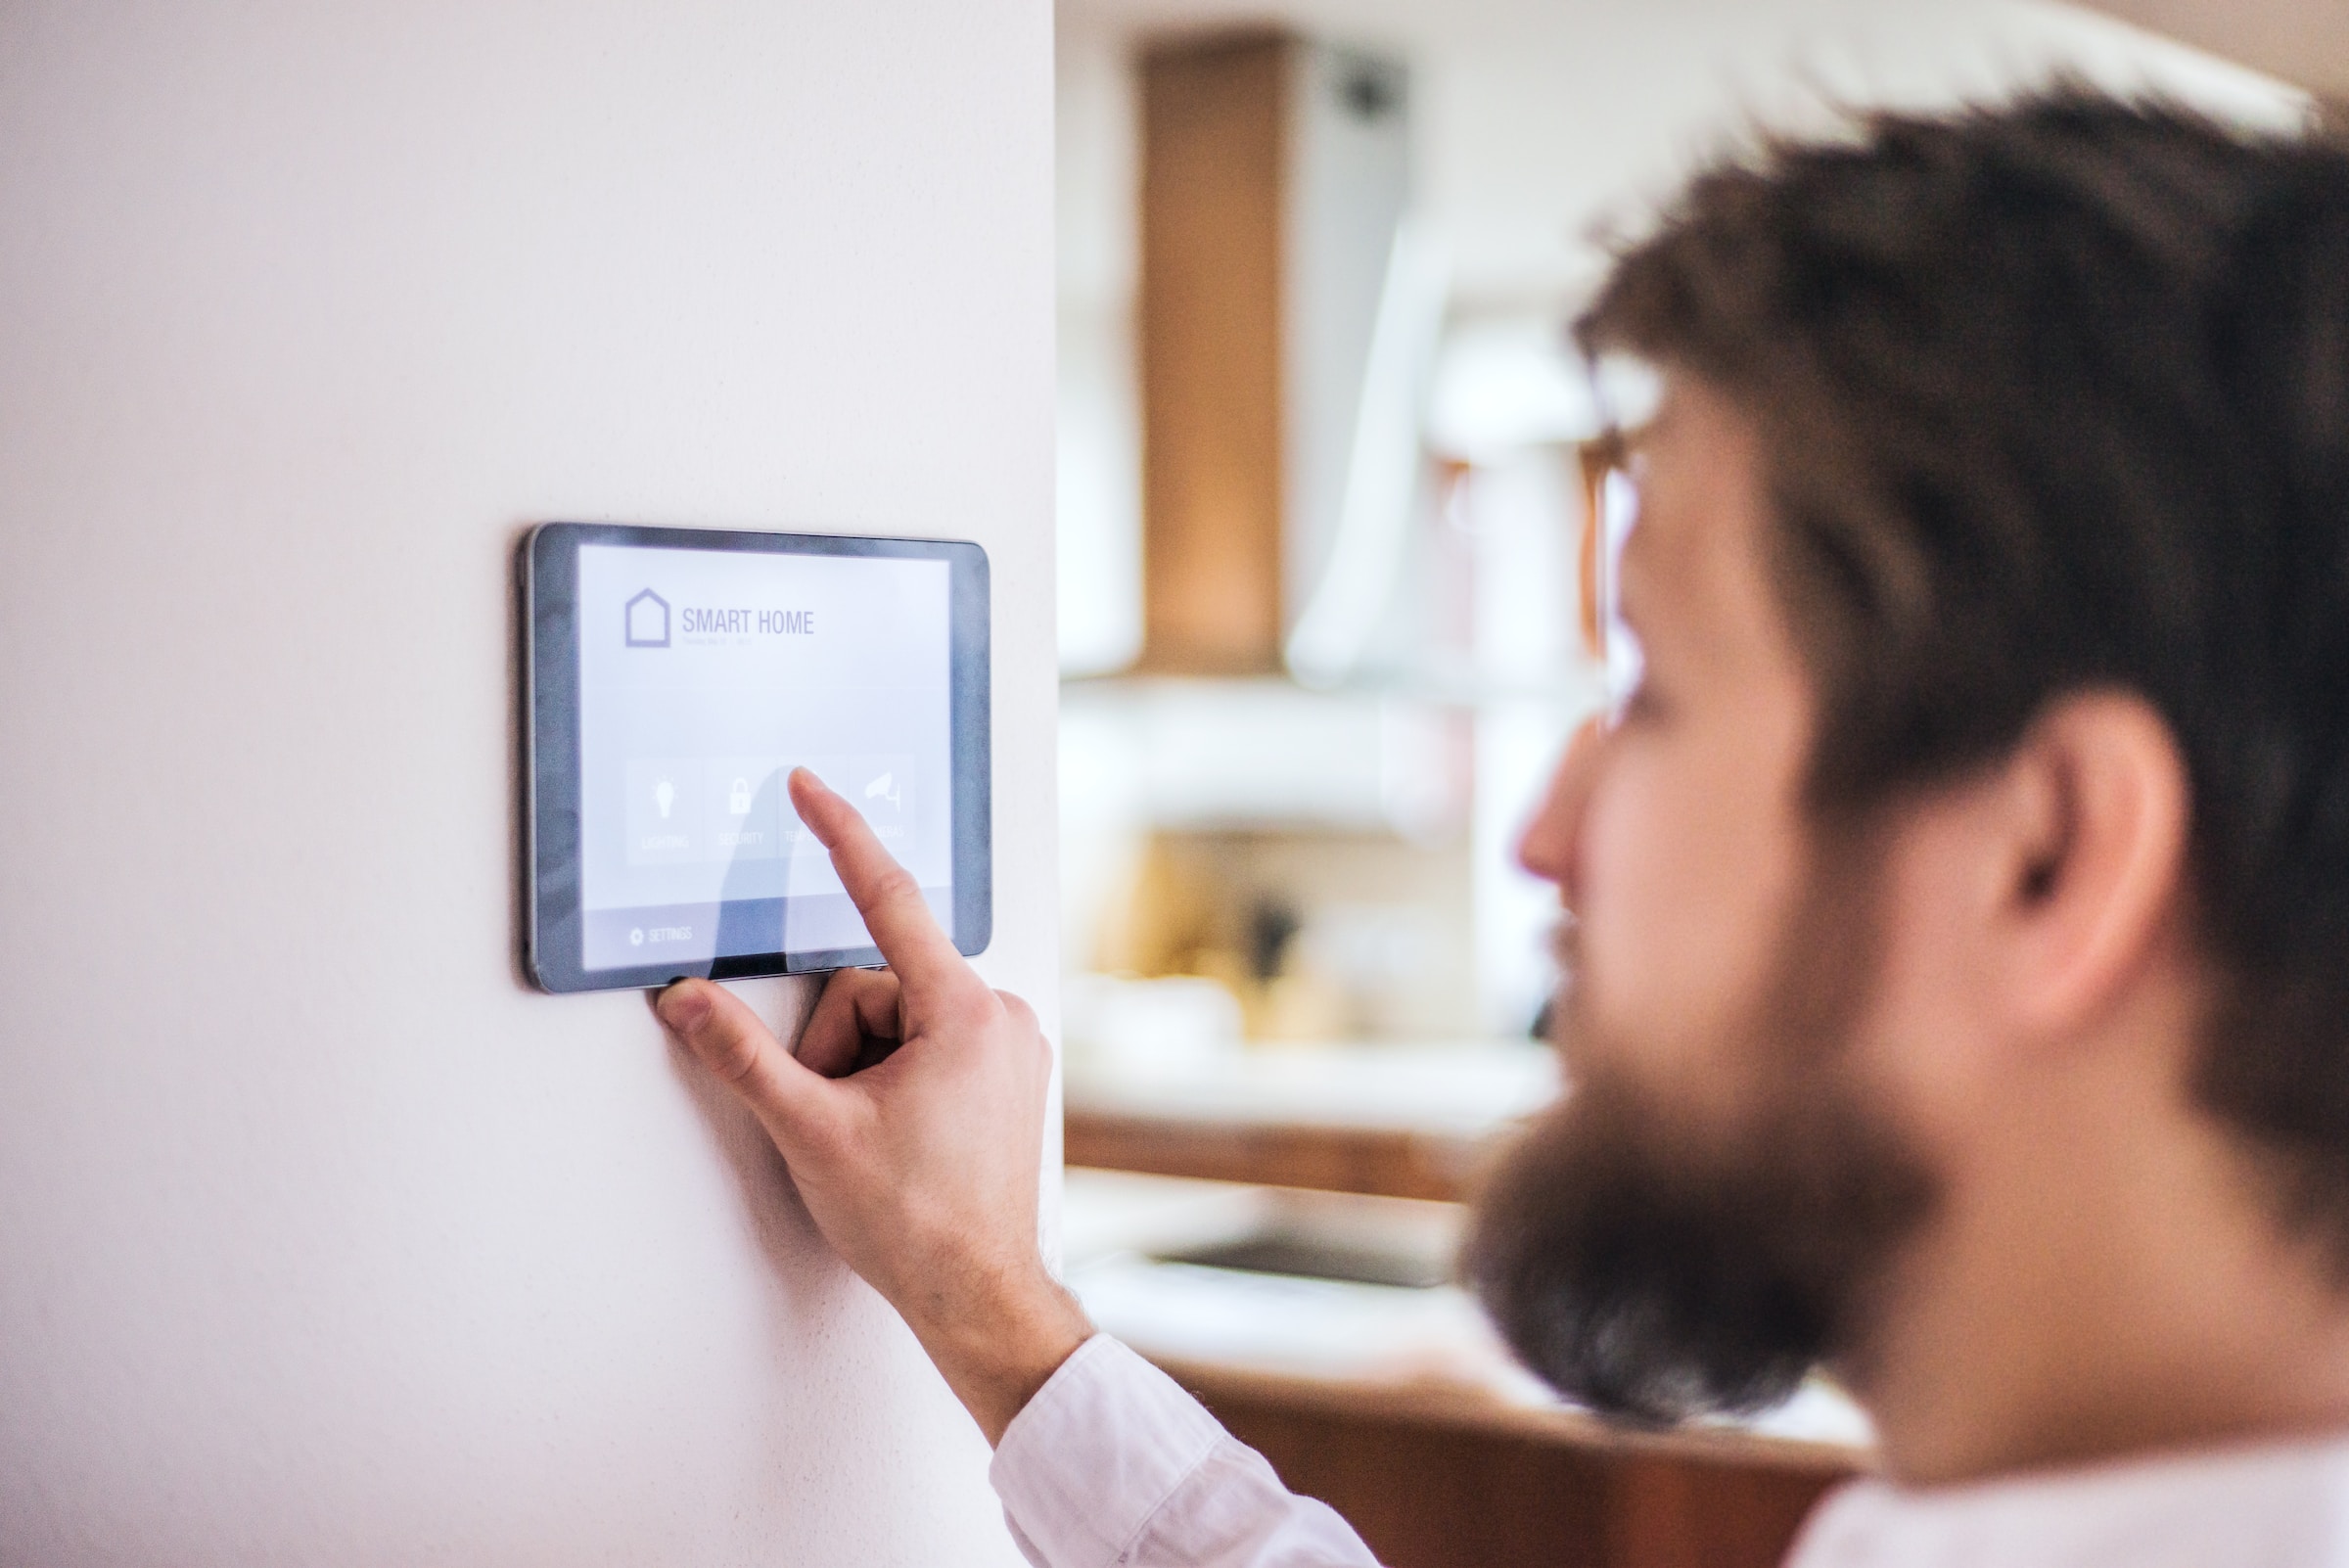 A man is using an ipad to control the heating in his home.